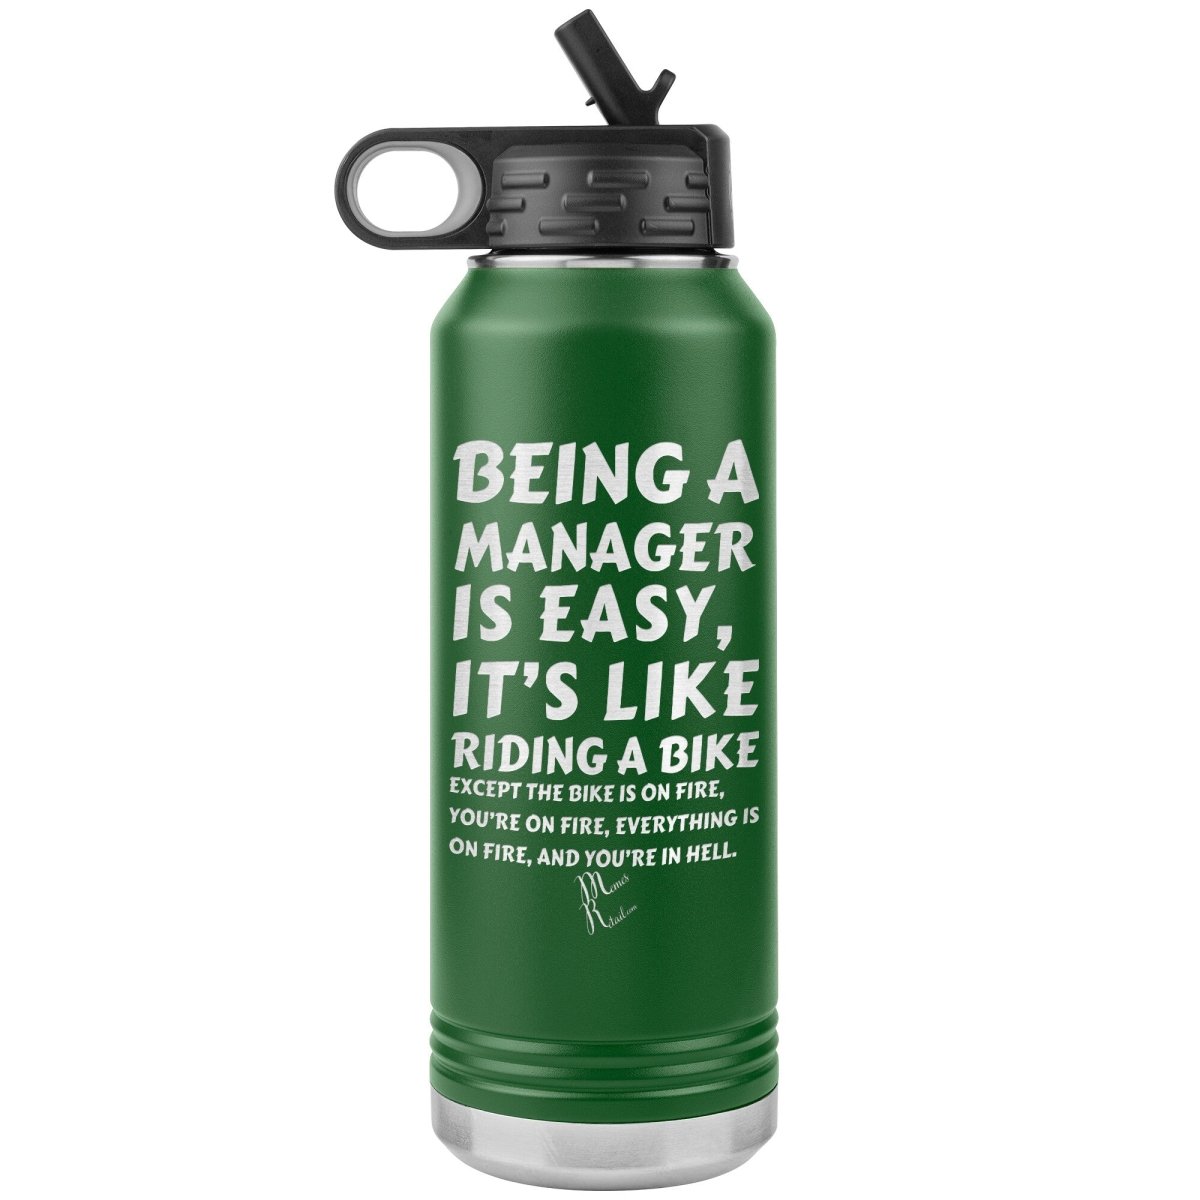 Being a manager is easy….32oz Water Tumbler, Green - MemesRetail.com